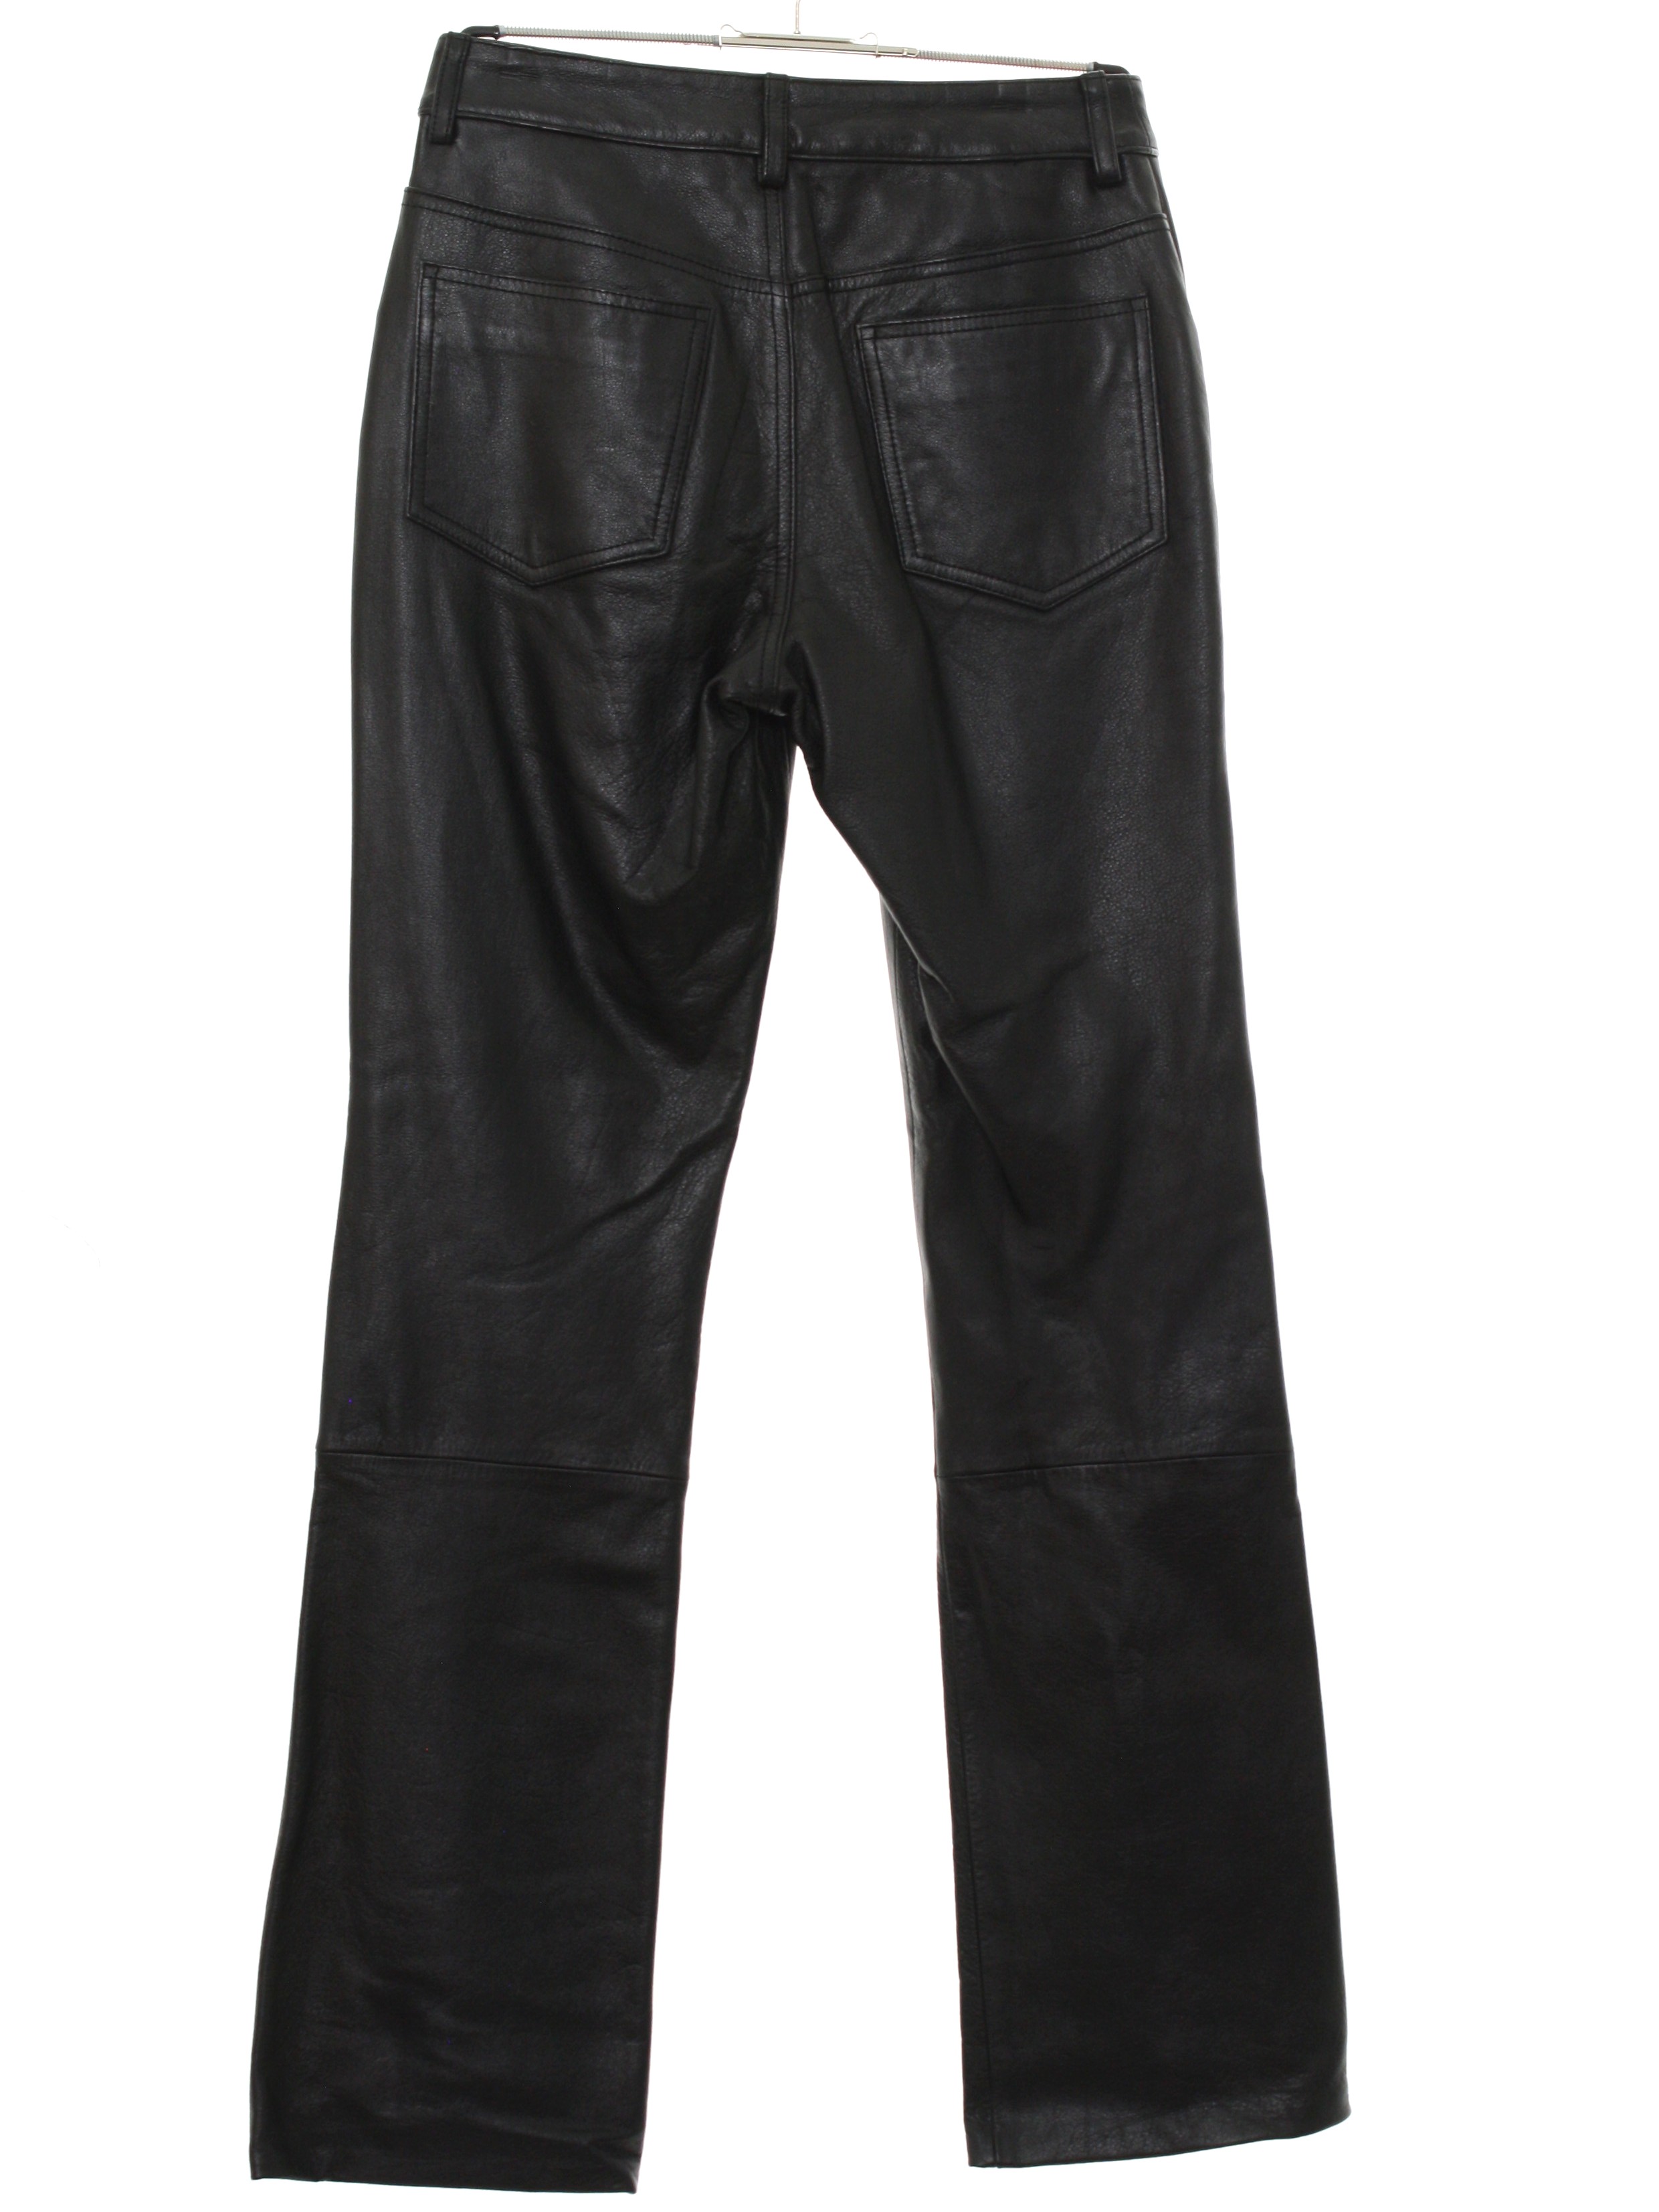 womens bootcut leather pants